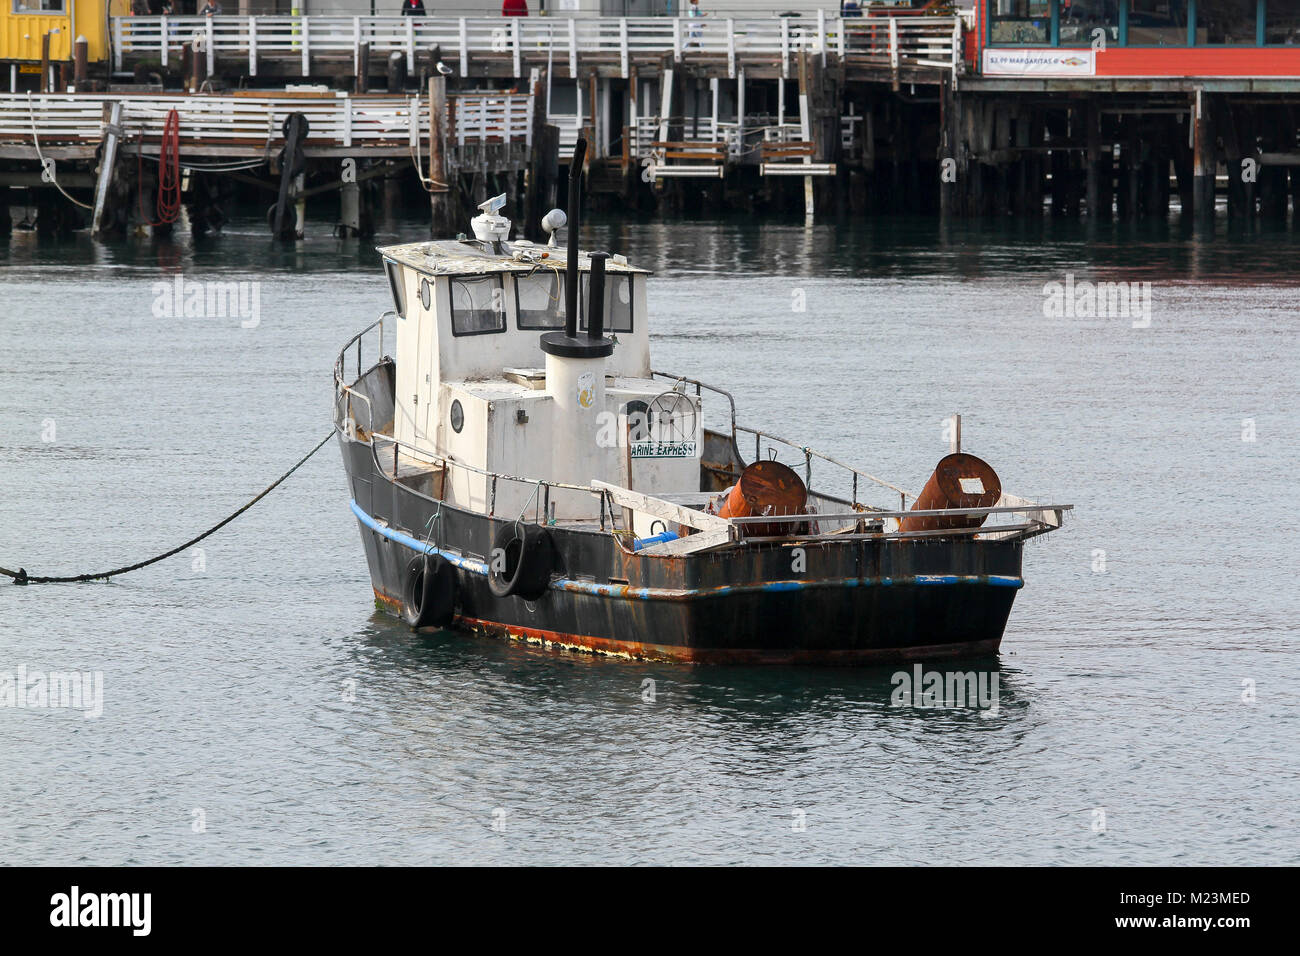 An old boat docked at Municipal Wharf II, Monterey, California, United States Stock Photo